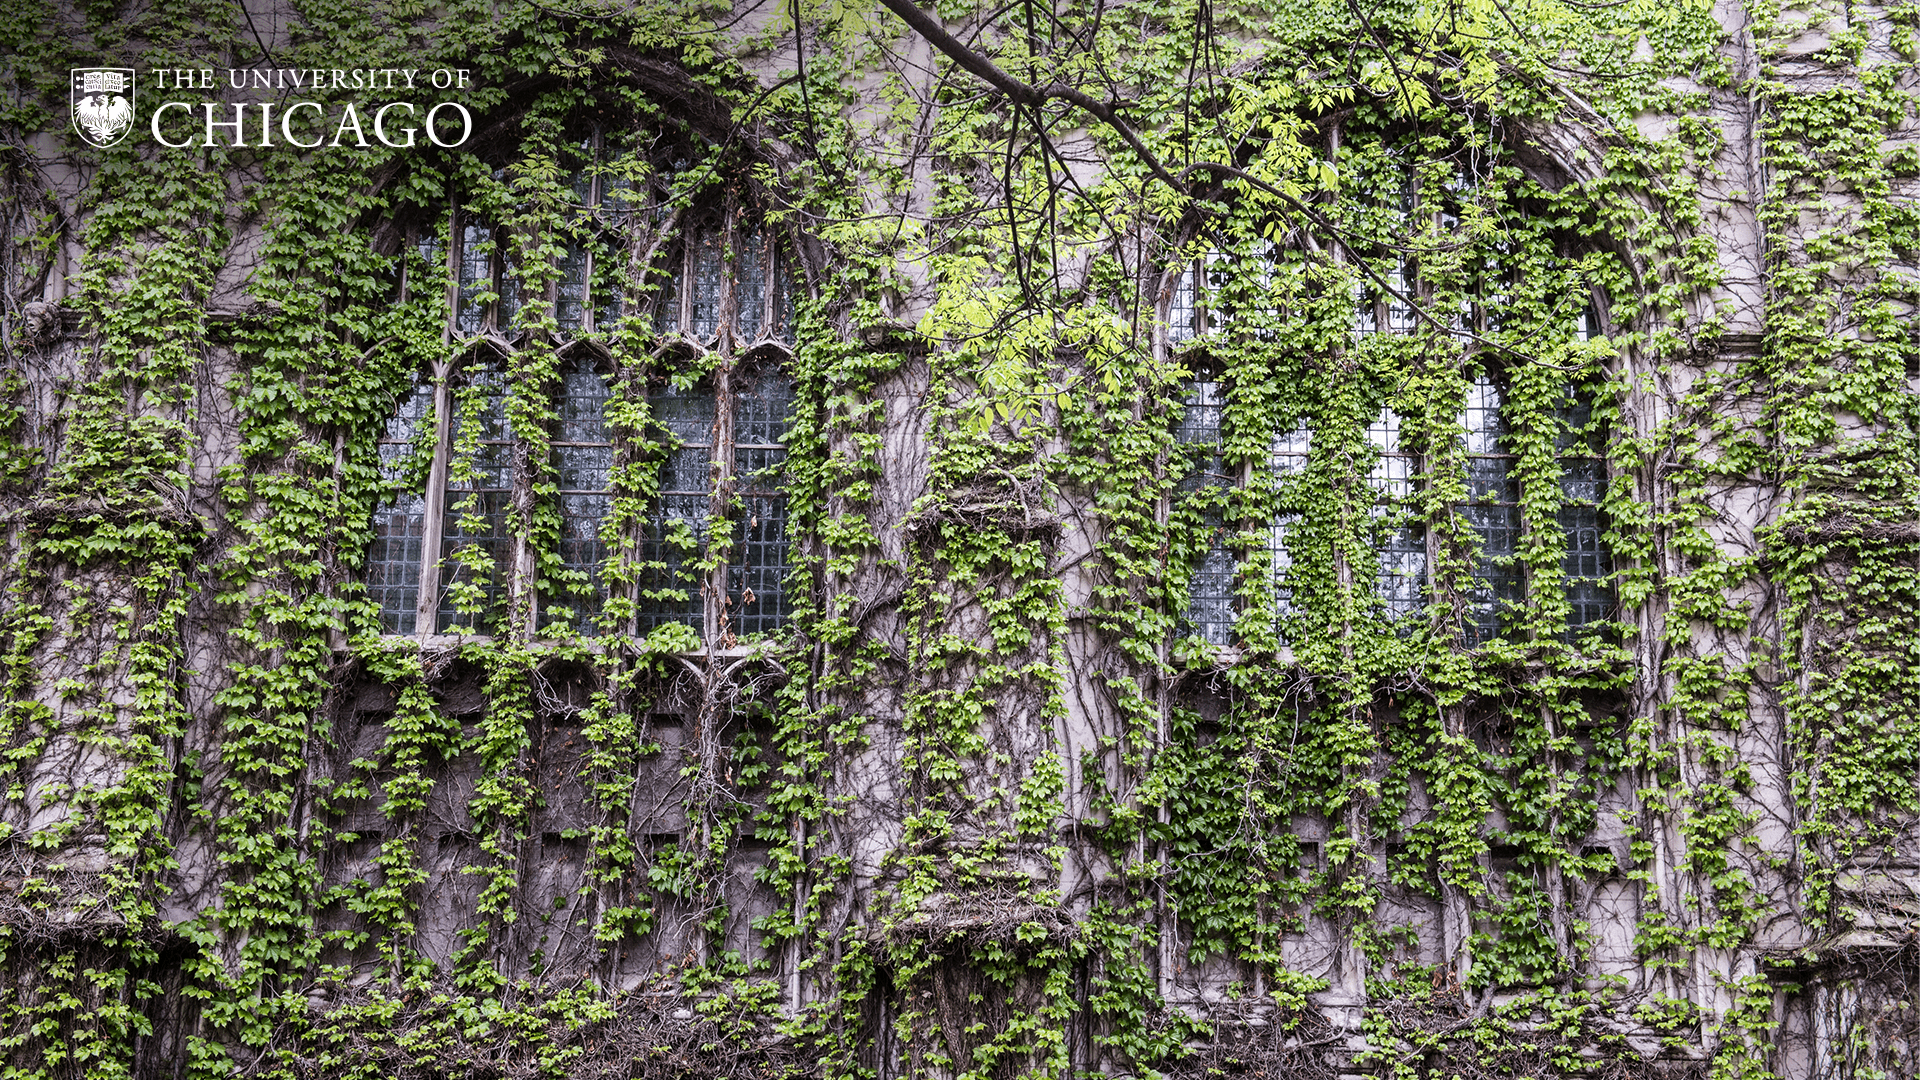 Gothic arched windows covered in ivy